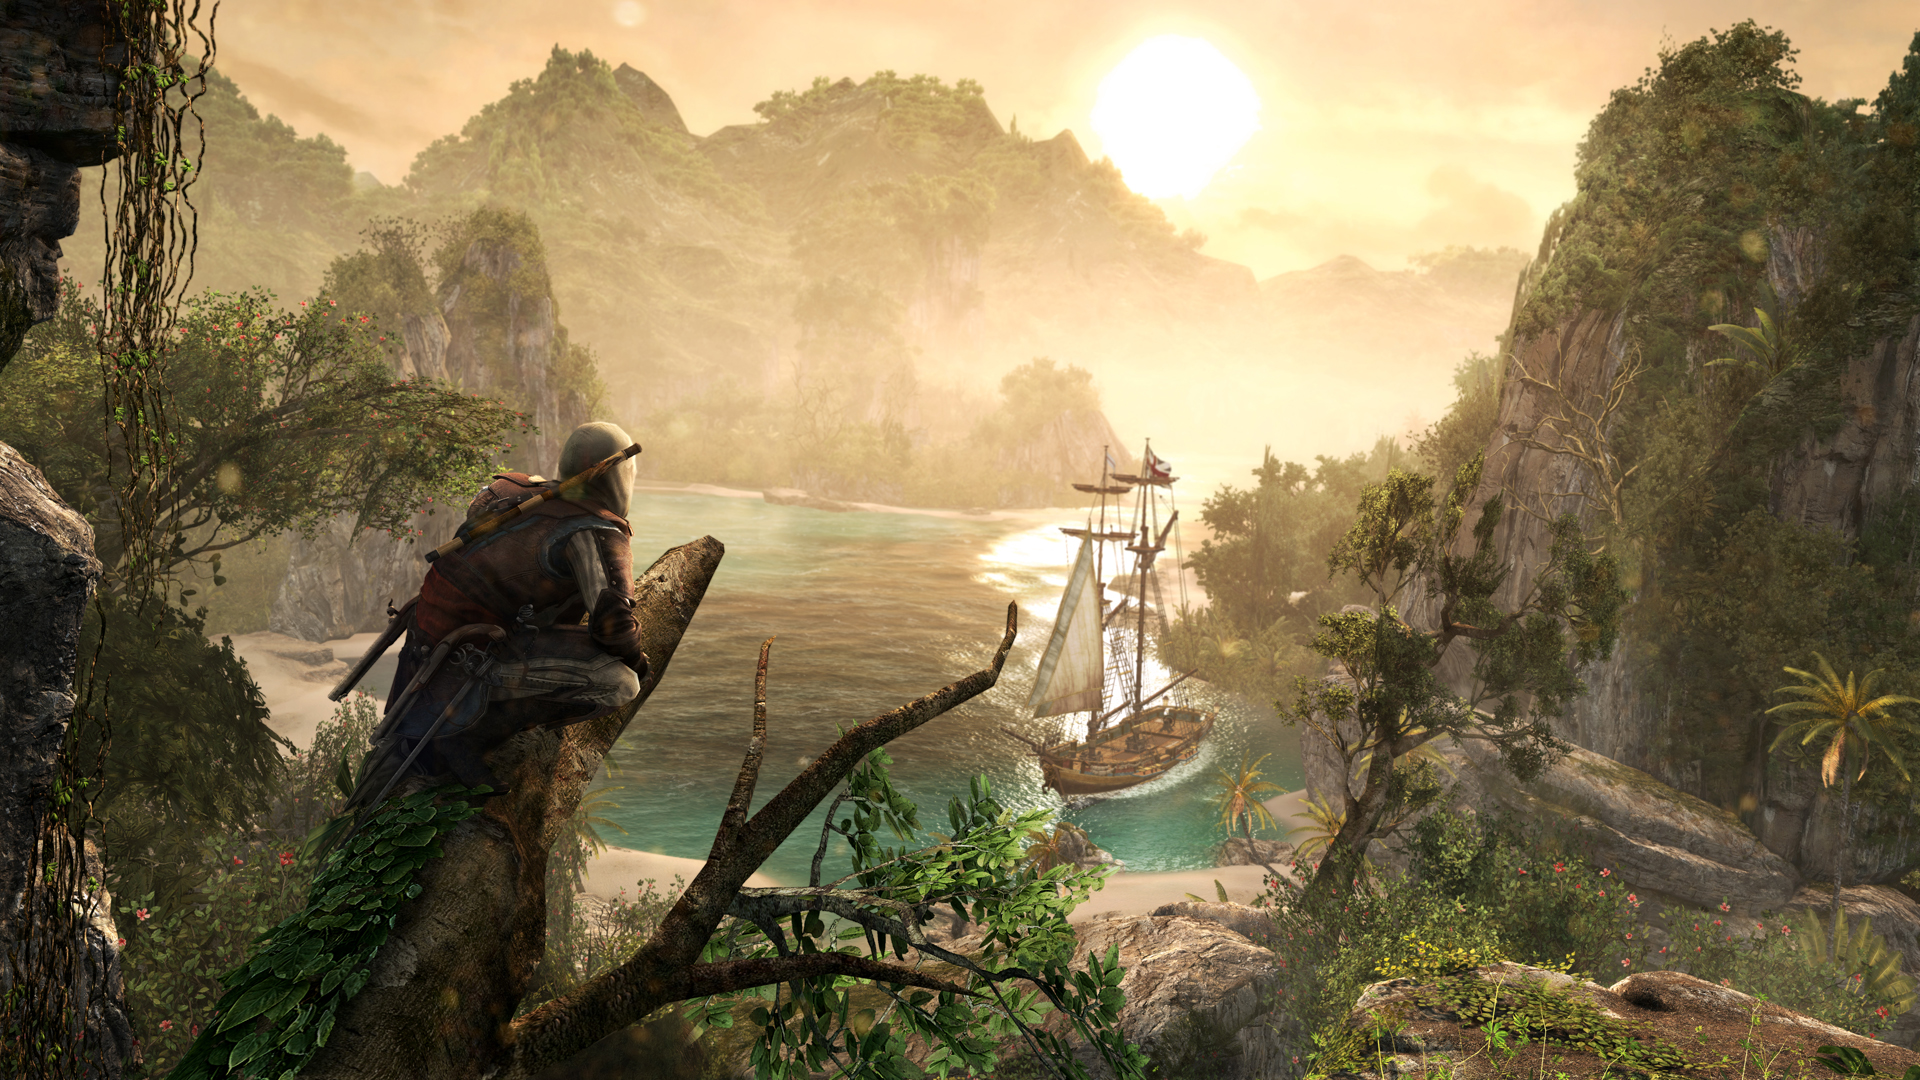 Assassins Creed 4 Black Flag Sets Sail Today On Xbox One